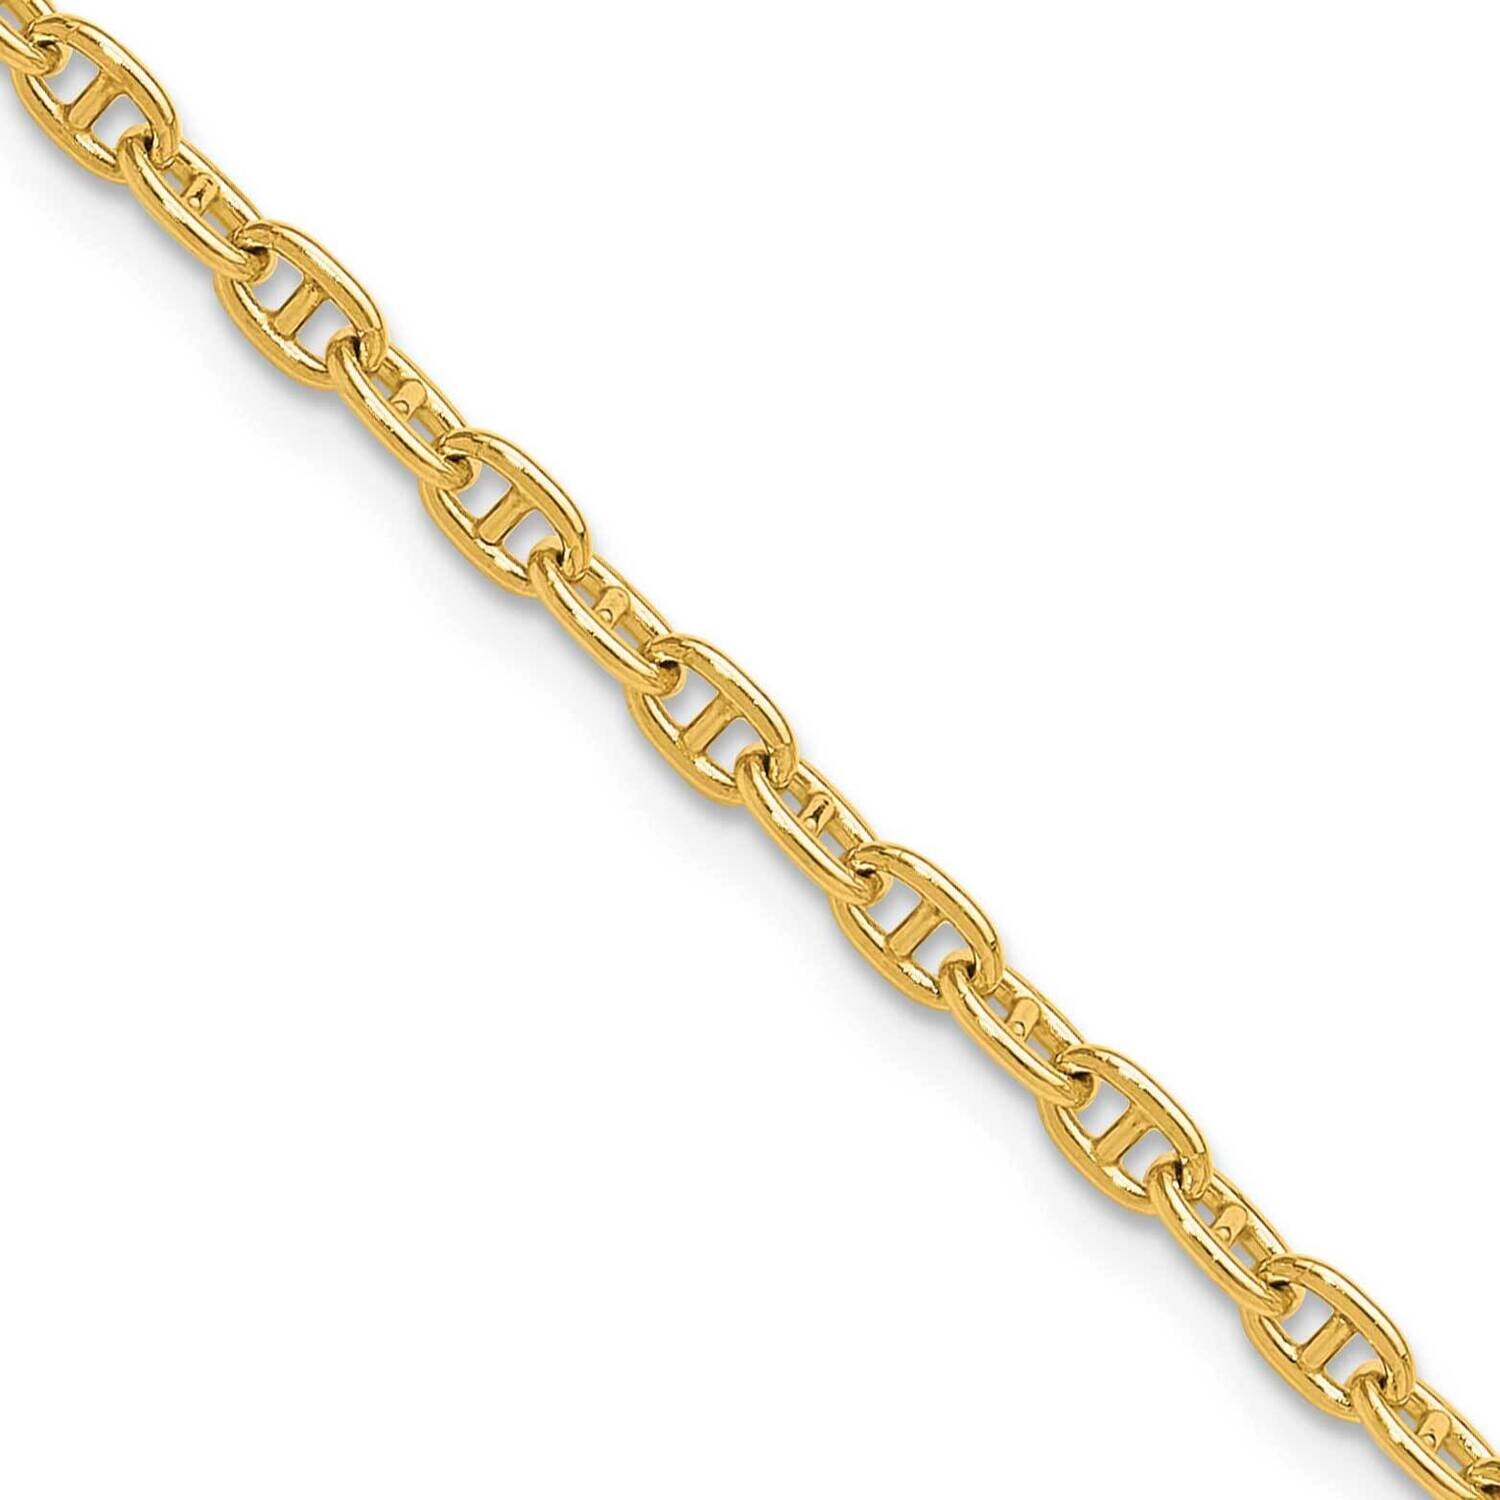 3.0mm Mariners Link Chain 24 Inch 14k Gold MA080-24